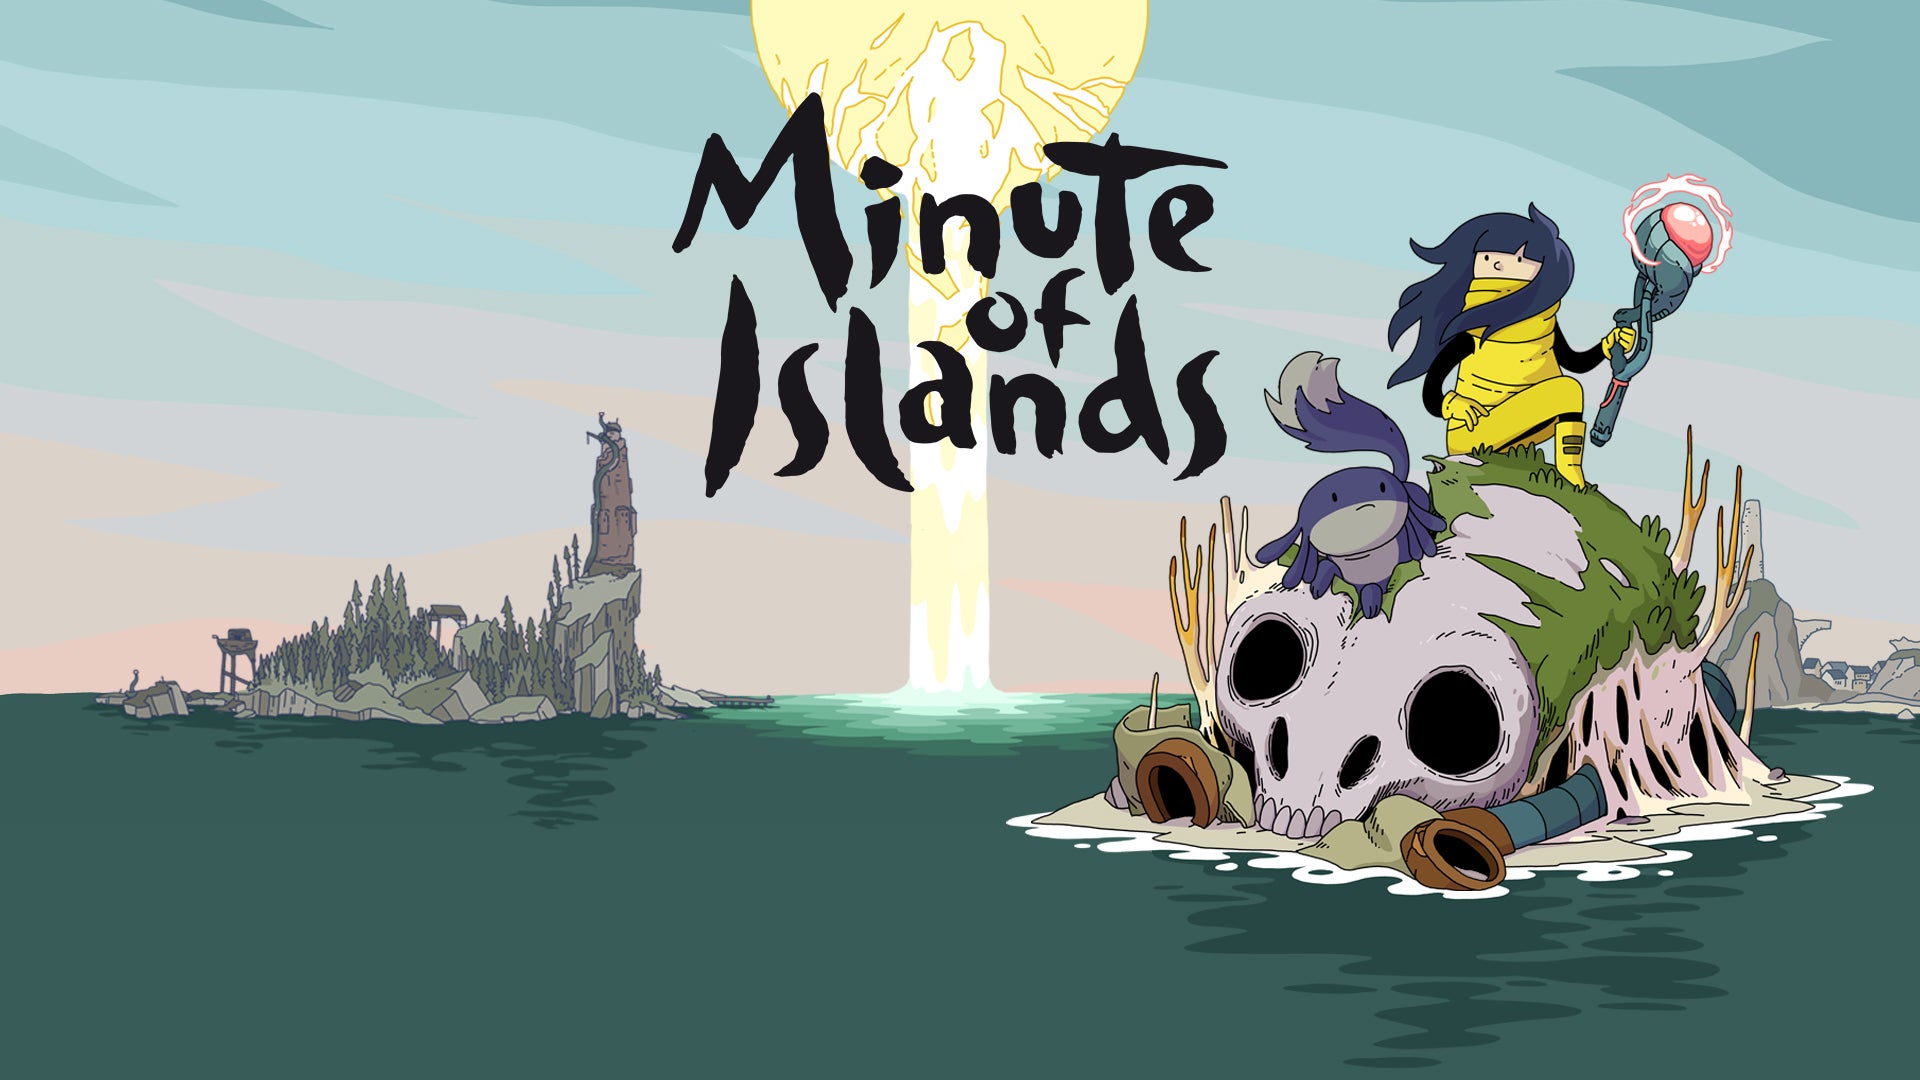 Minute of Islands Guide